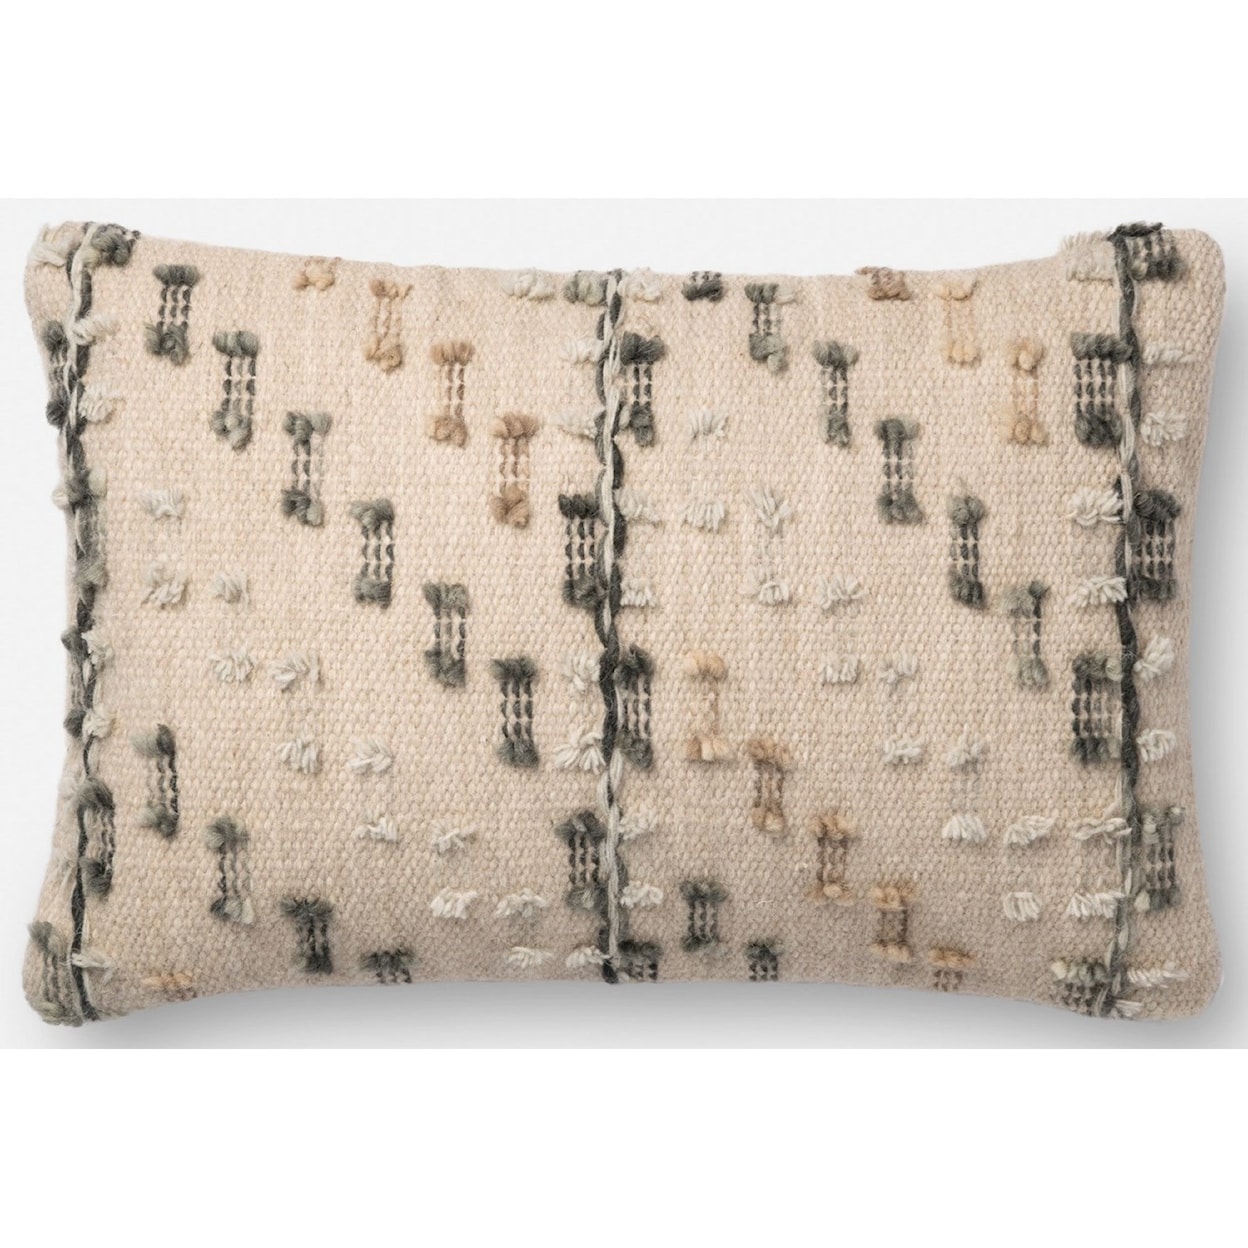 Magnolia Home by Joanna Gaines for Loloi Accent Pillows 13" x 21" Cover Only